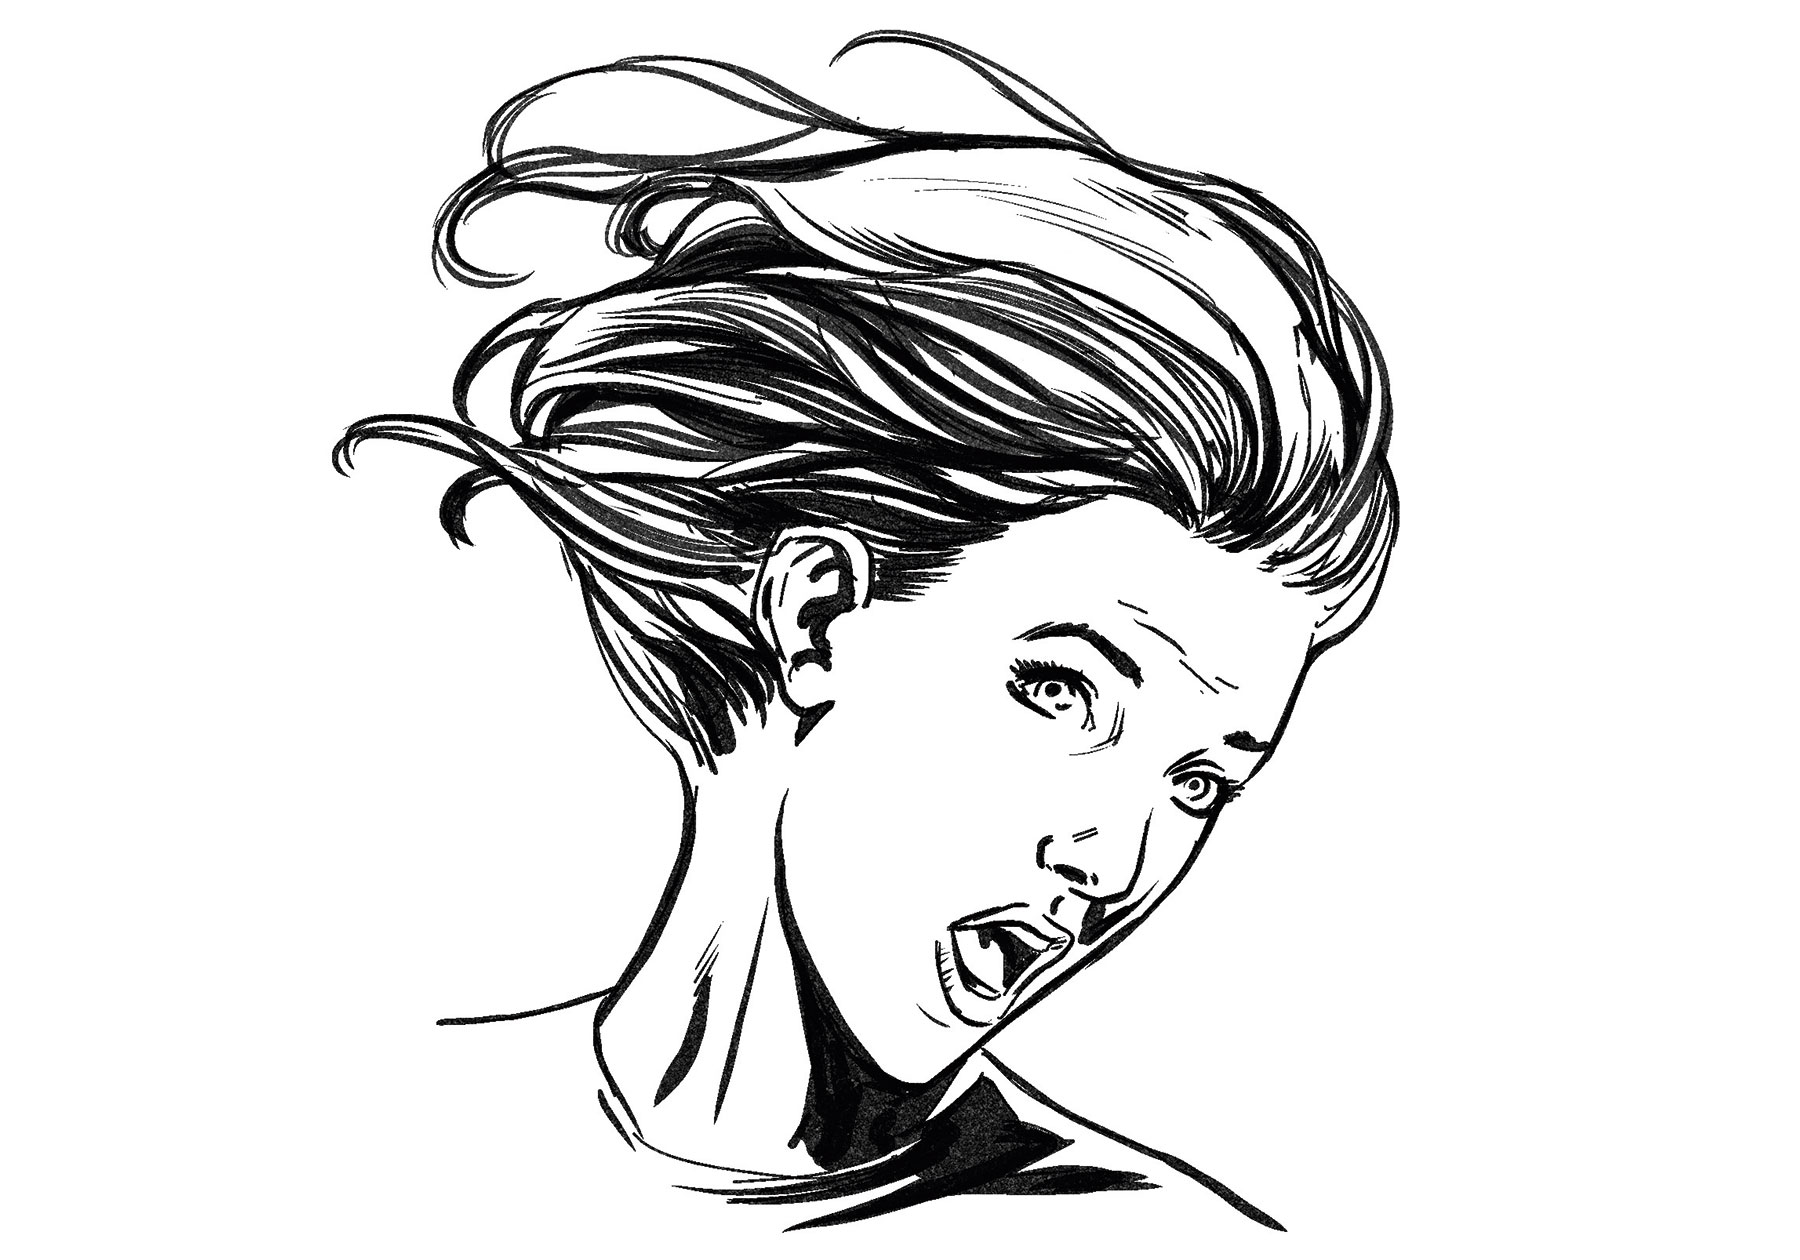 Sketch of a woman with her head twisted to one side